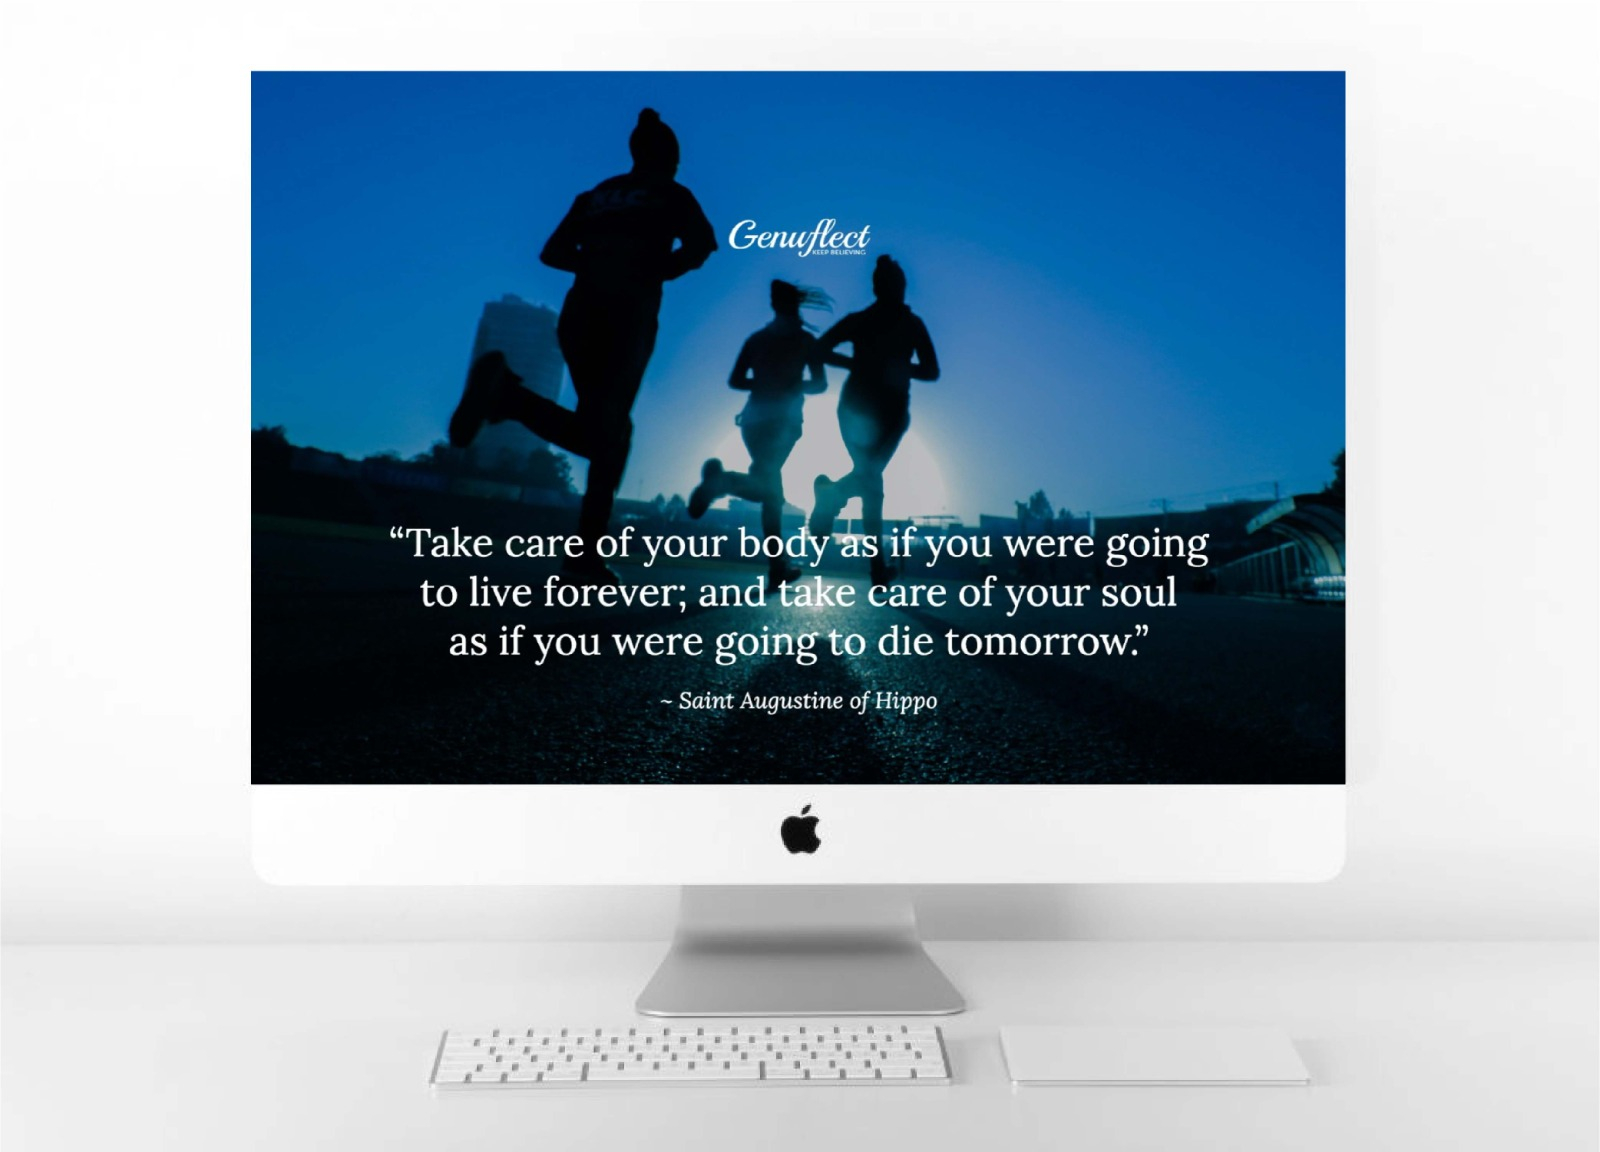 Genuflect computer image of a Silhouette of three people jogging